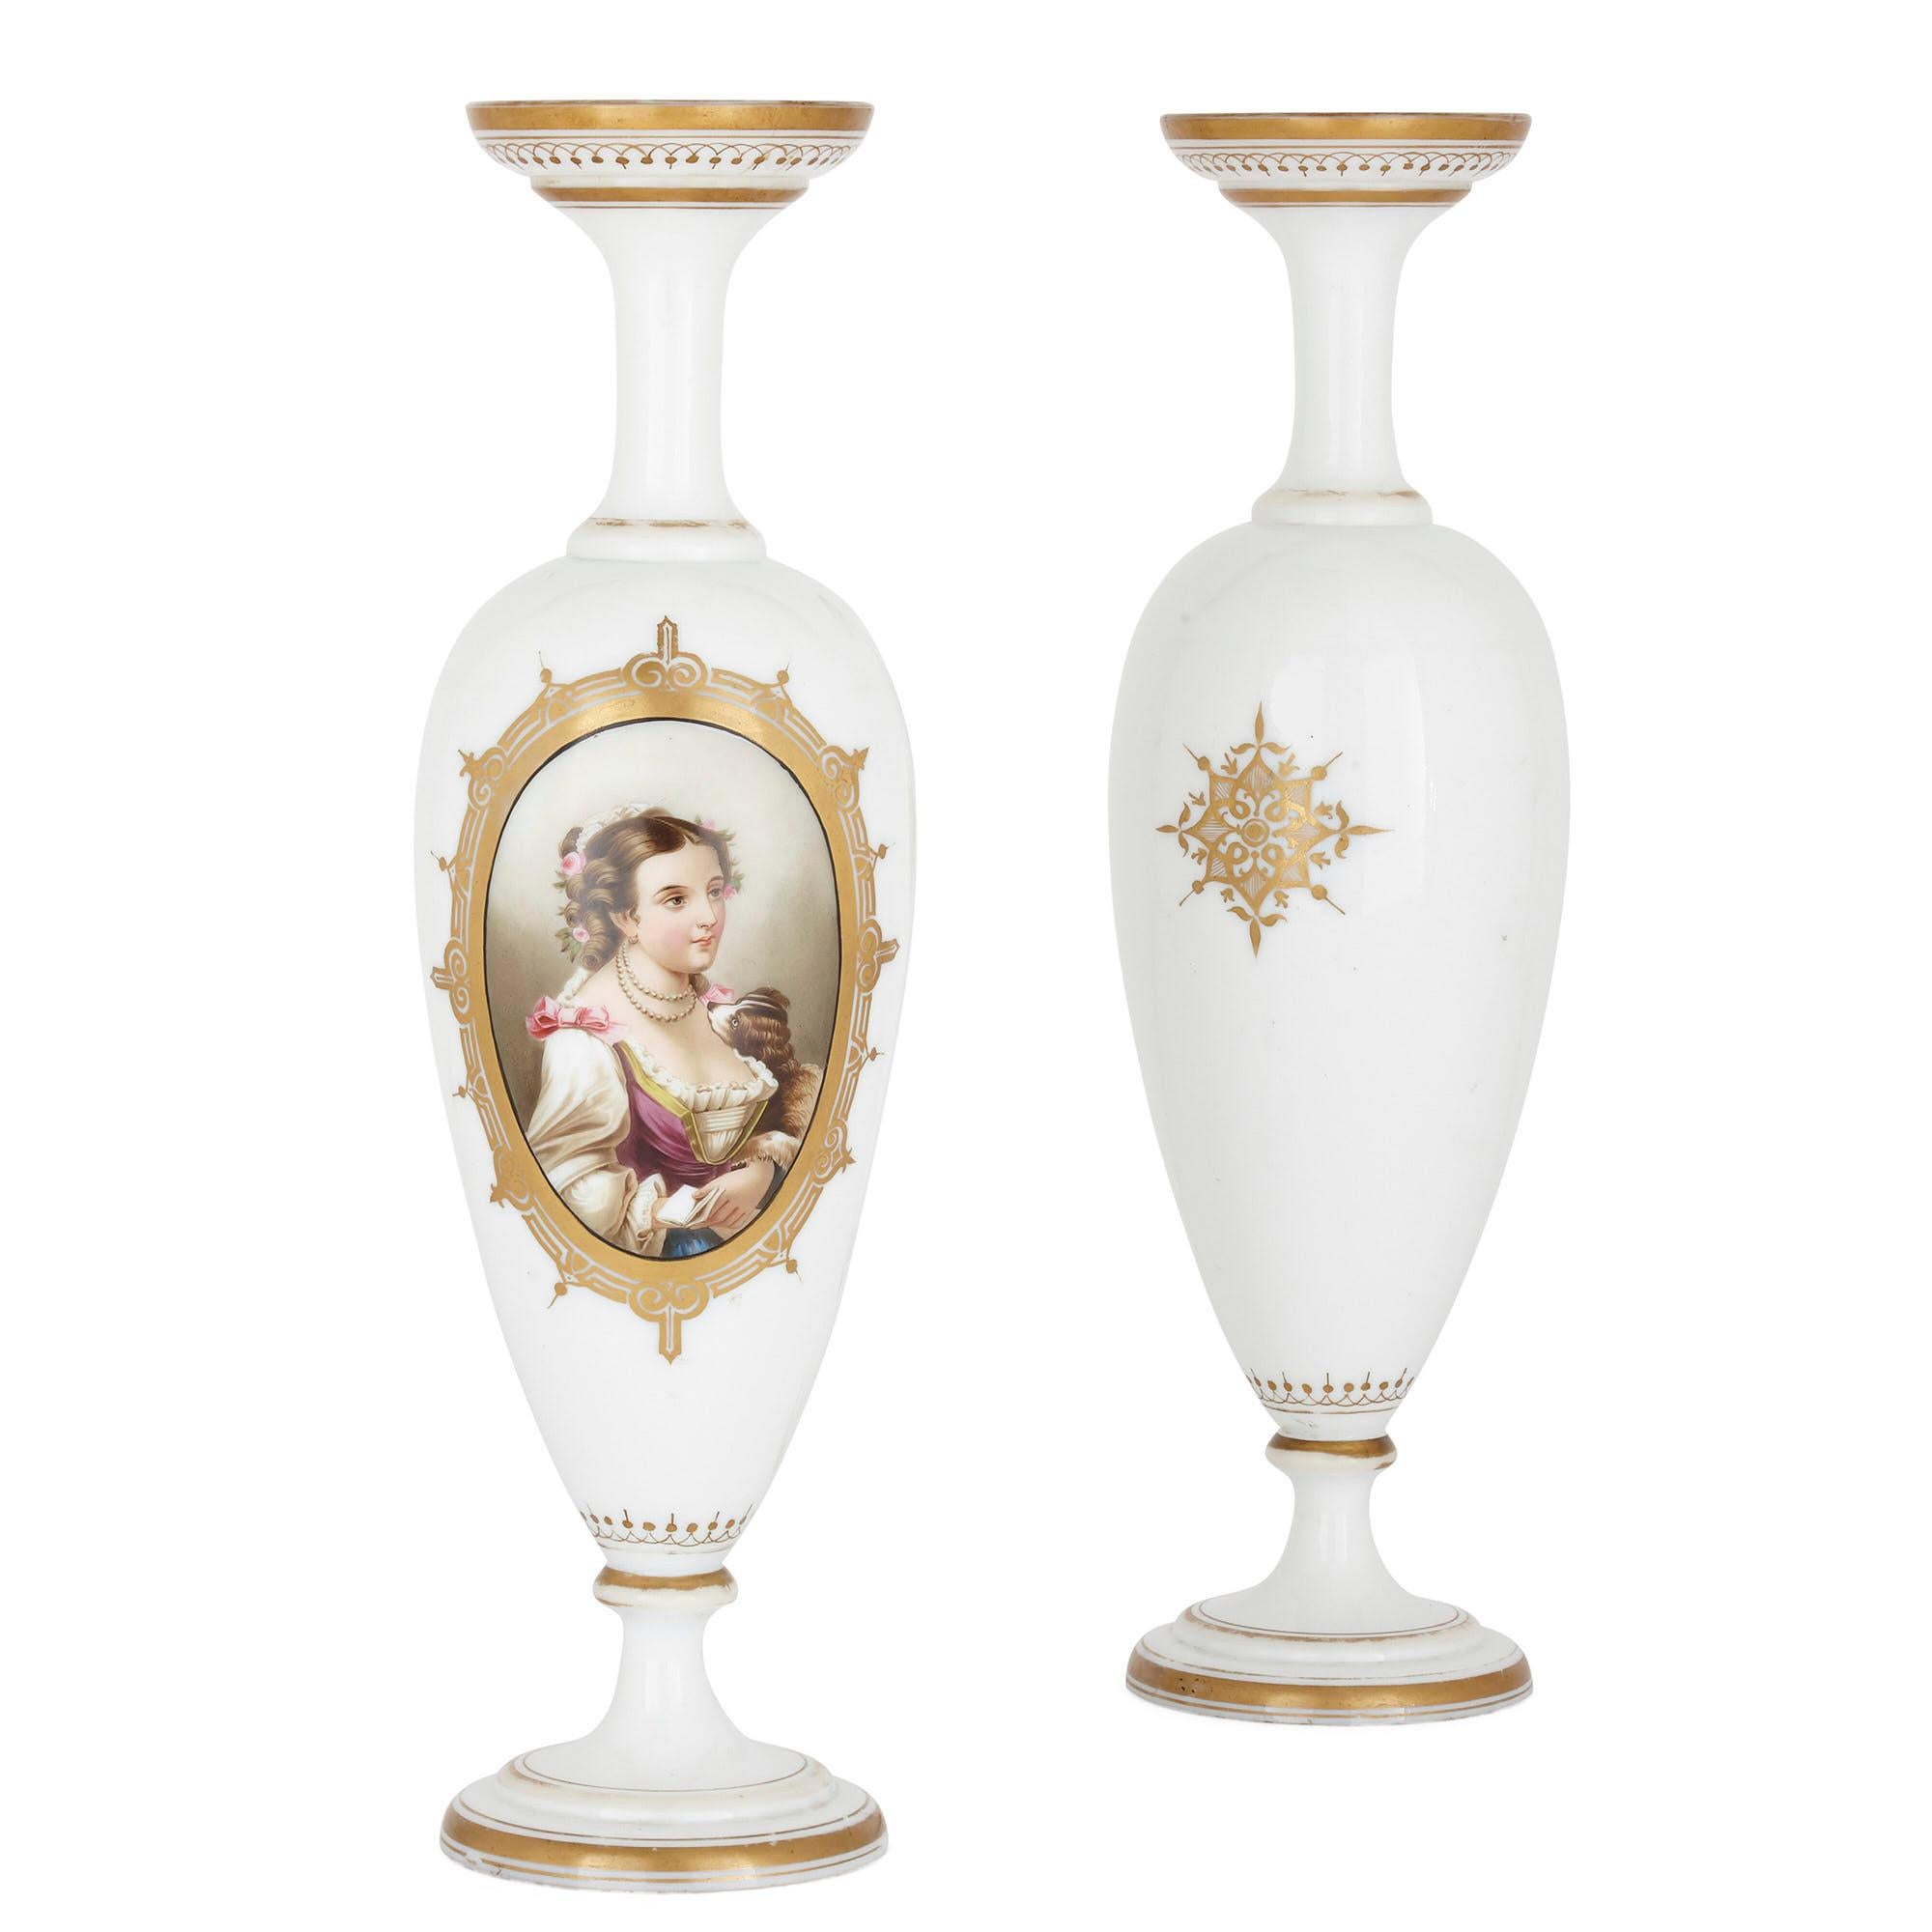 Pair of French glass vases painted with portraits
French, late 19th century
Measures: Height 54cm, diameter 15cm

Opaline glass, or opaque glass, often tinted with a hint of color, has been prized for centuries for its elegant beauty. The